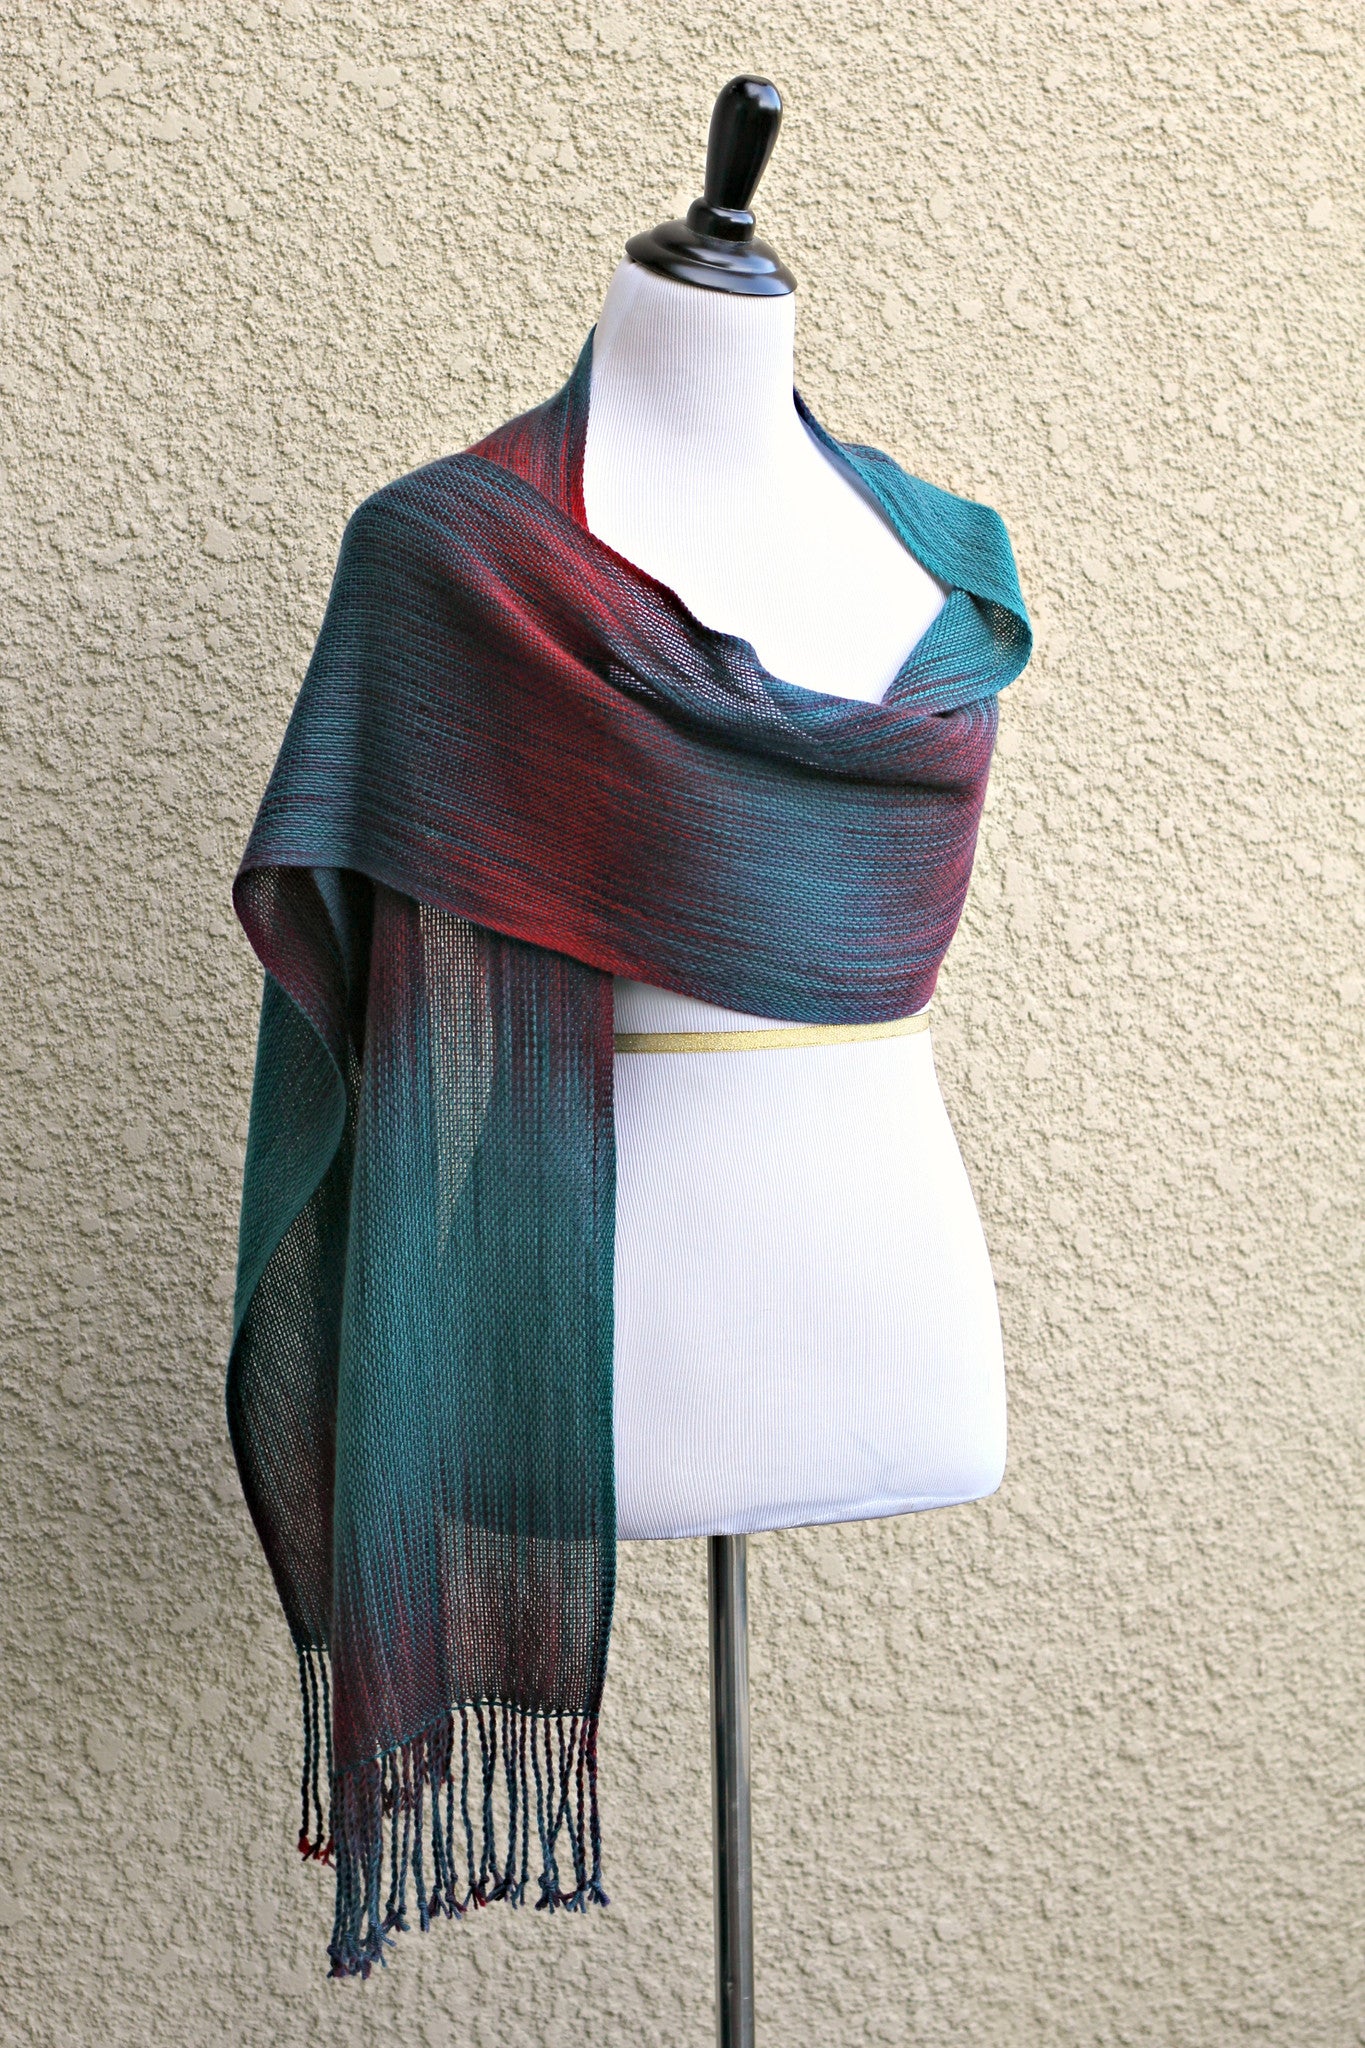 Woven scarf in dark teal, burgundy and red colors, gift for her